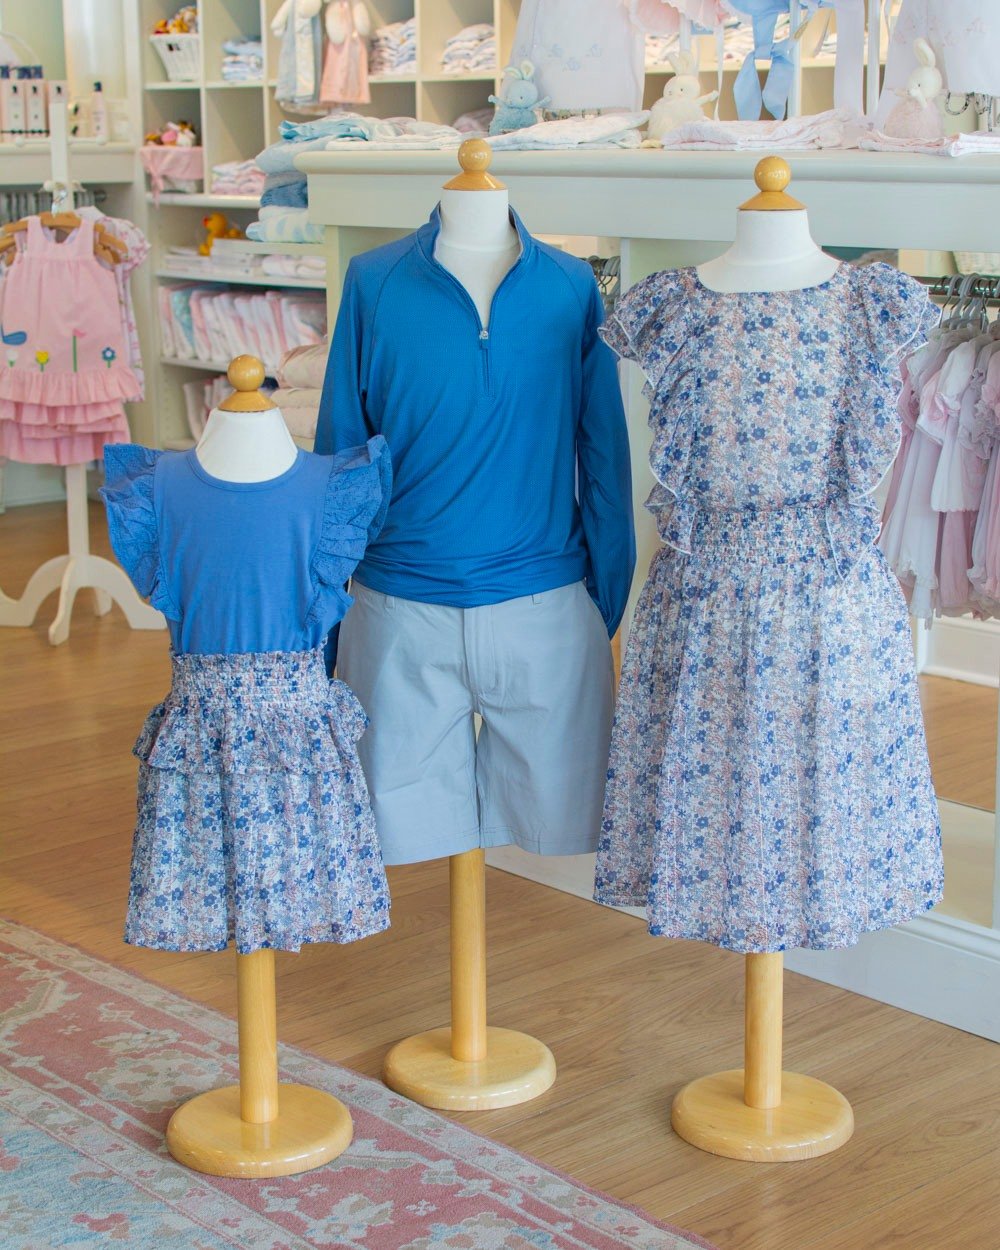 Just in from Creamie! Blue floral print in a ruffle dress and rouched ruffle skirt. We paired it with johnnie-O shorts and a cerulean blue quarter zip.